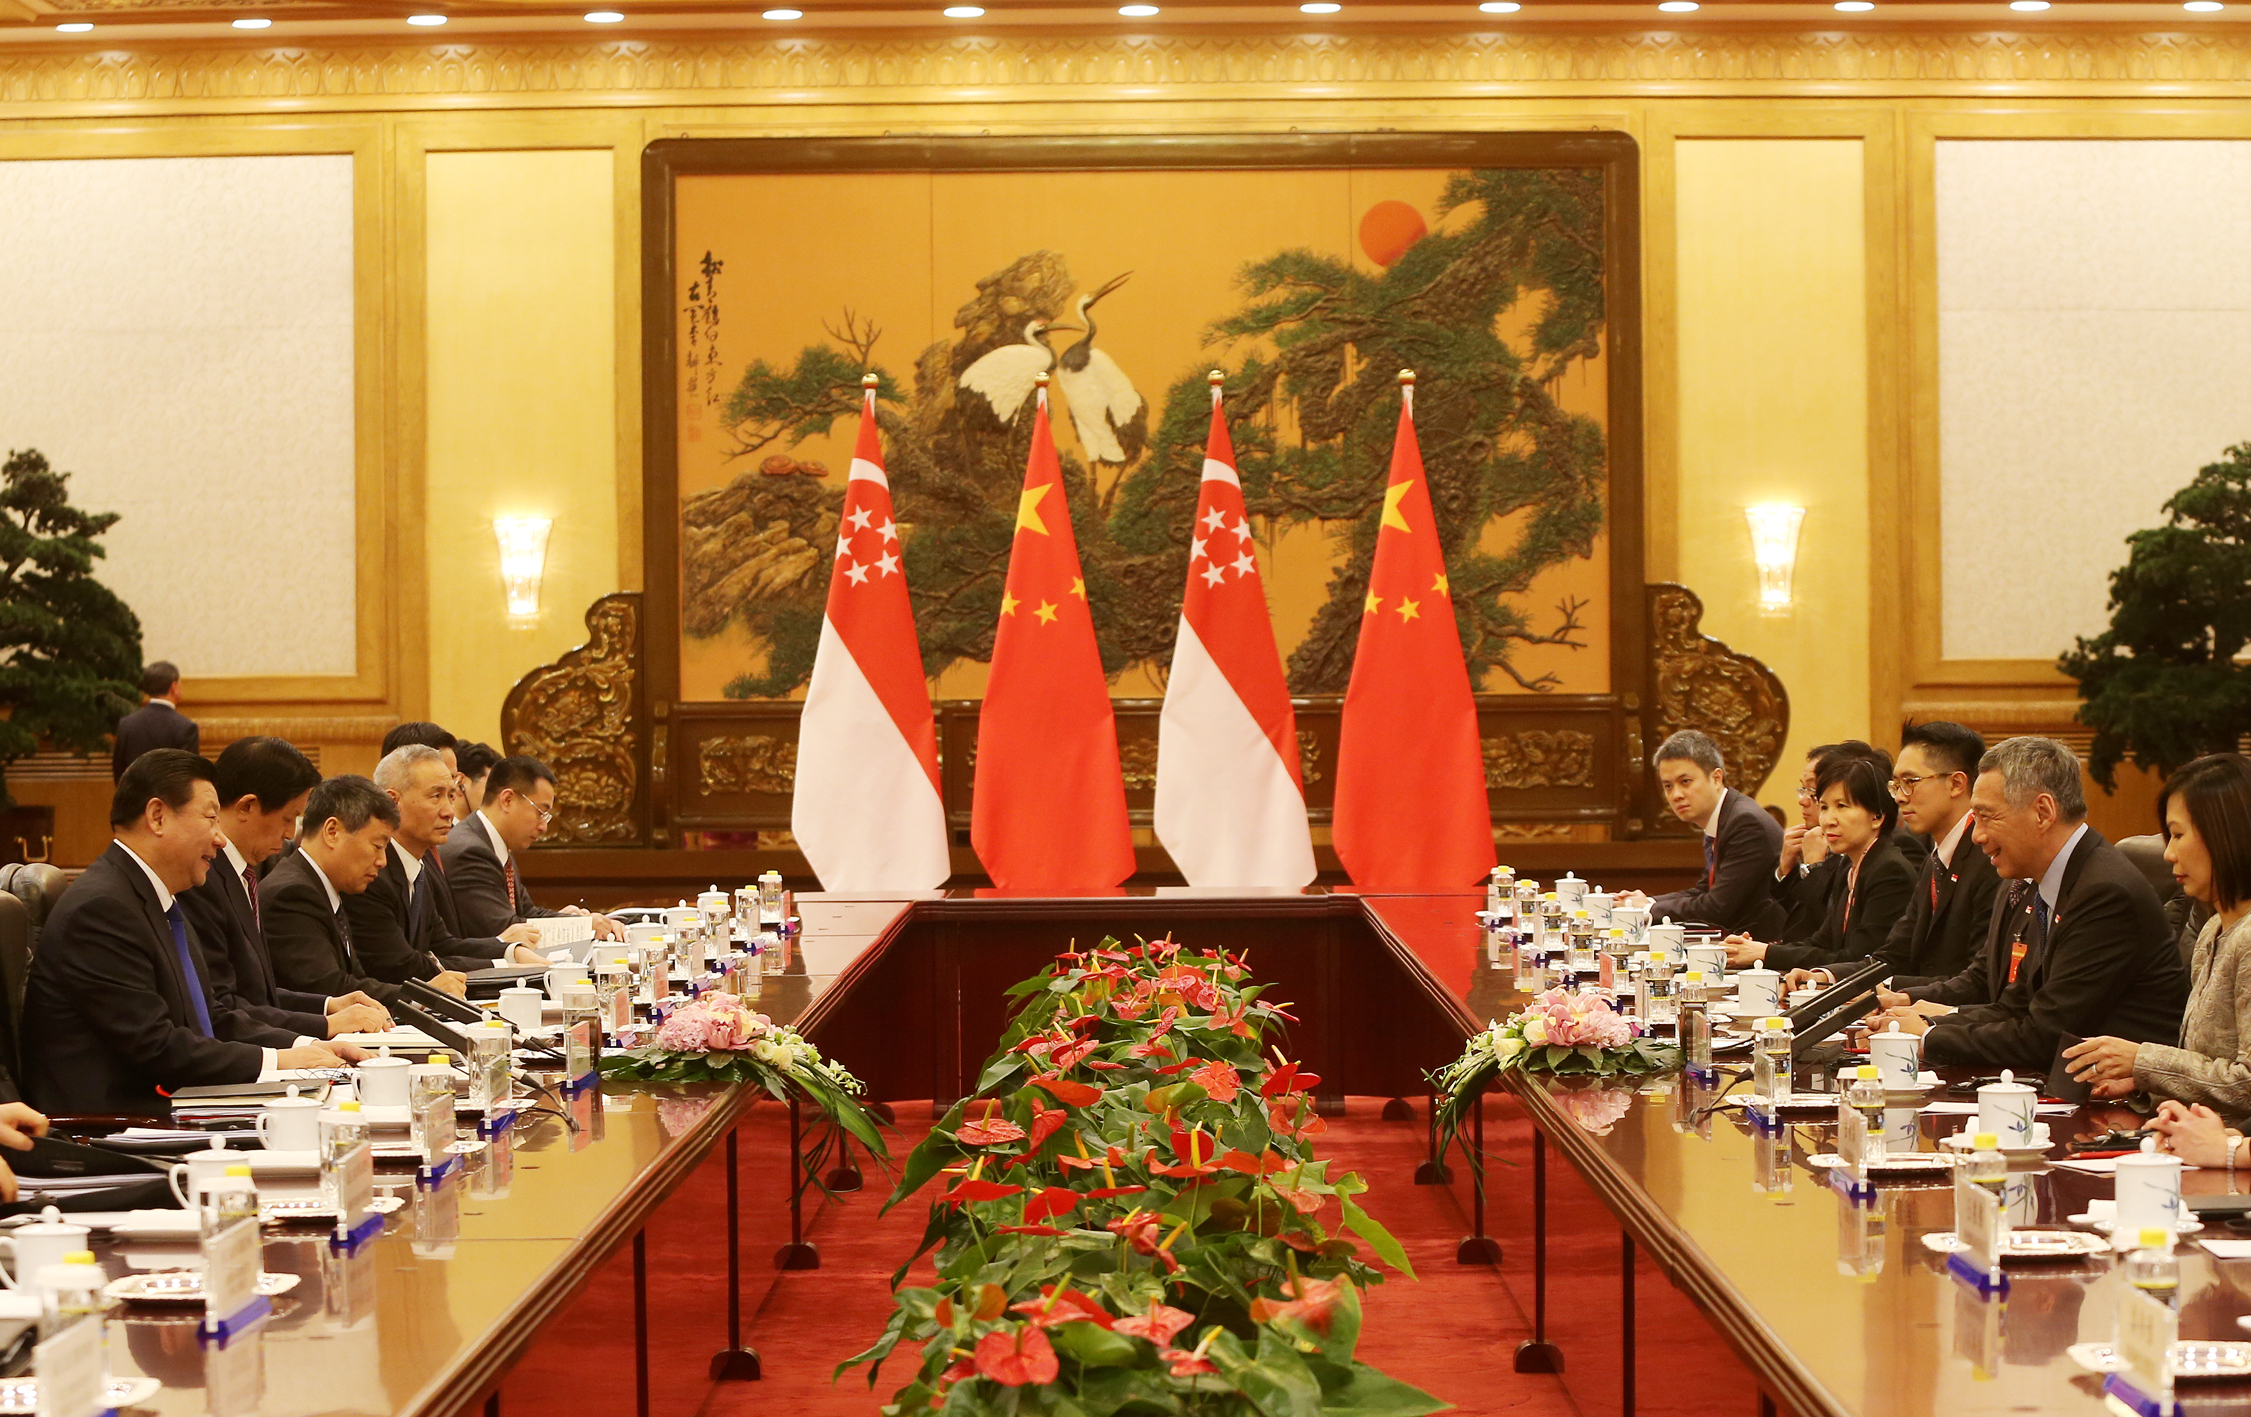 Prime Minister meeting PRC President Xi Jinping at the Great Hall of the People, Beijing, China on 9 Nov 2014 (LHZB Photo © Singapore Press Holdings Limited)